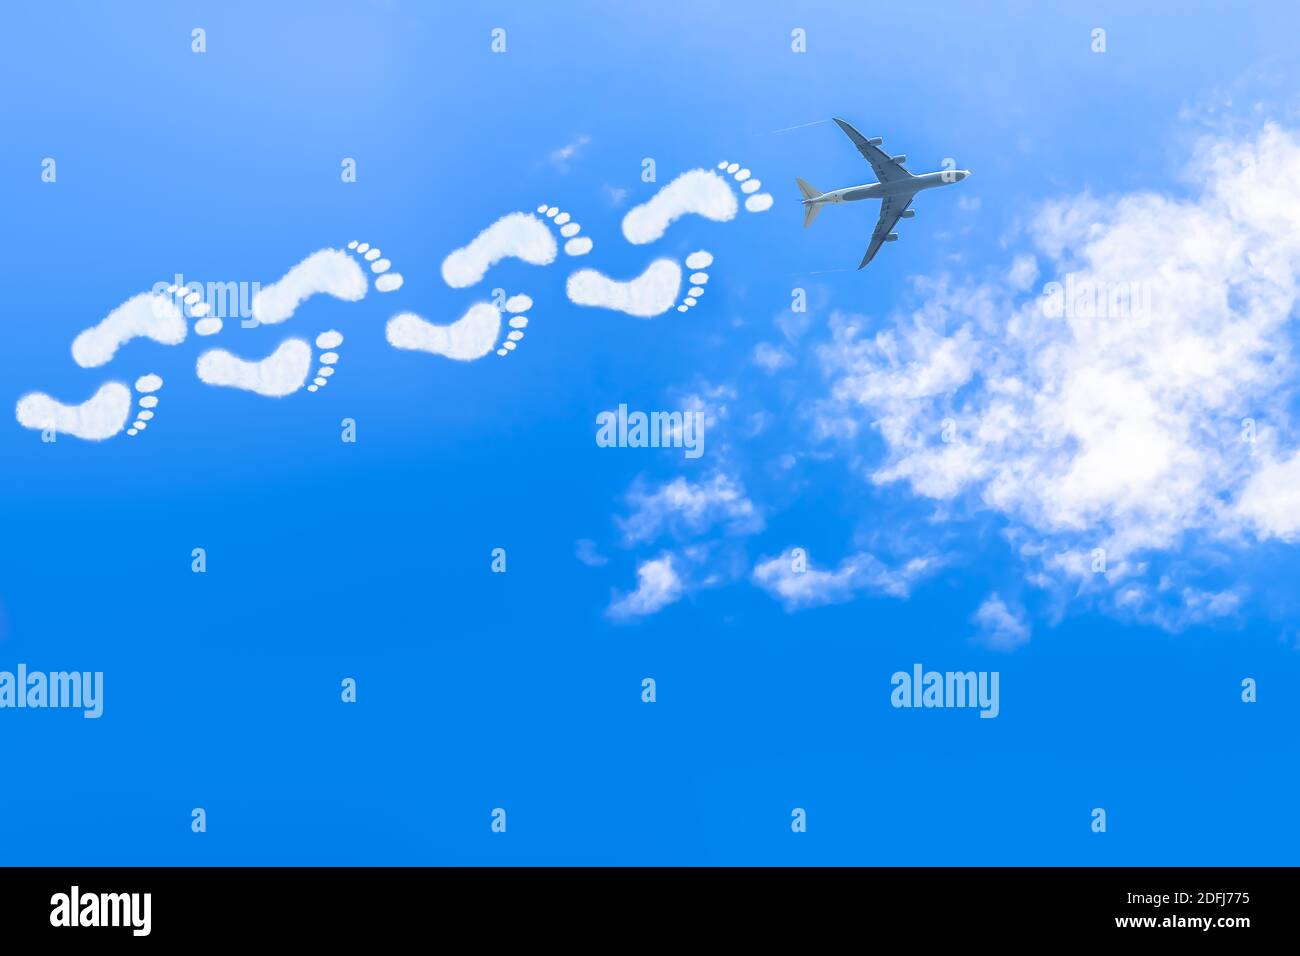 Clouds in the Shape of Footprints form the Condensation Trails of an Jet Airliner Stock Photo